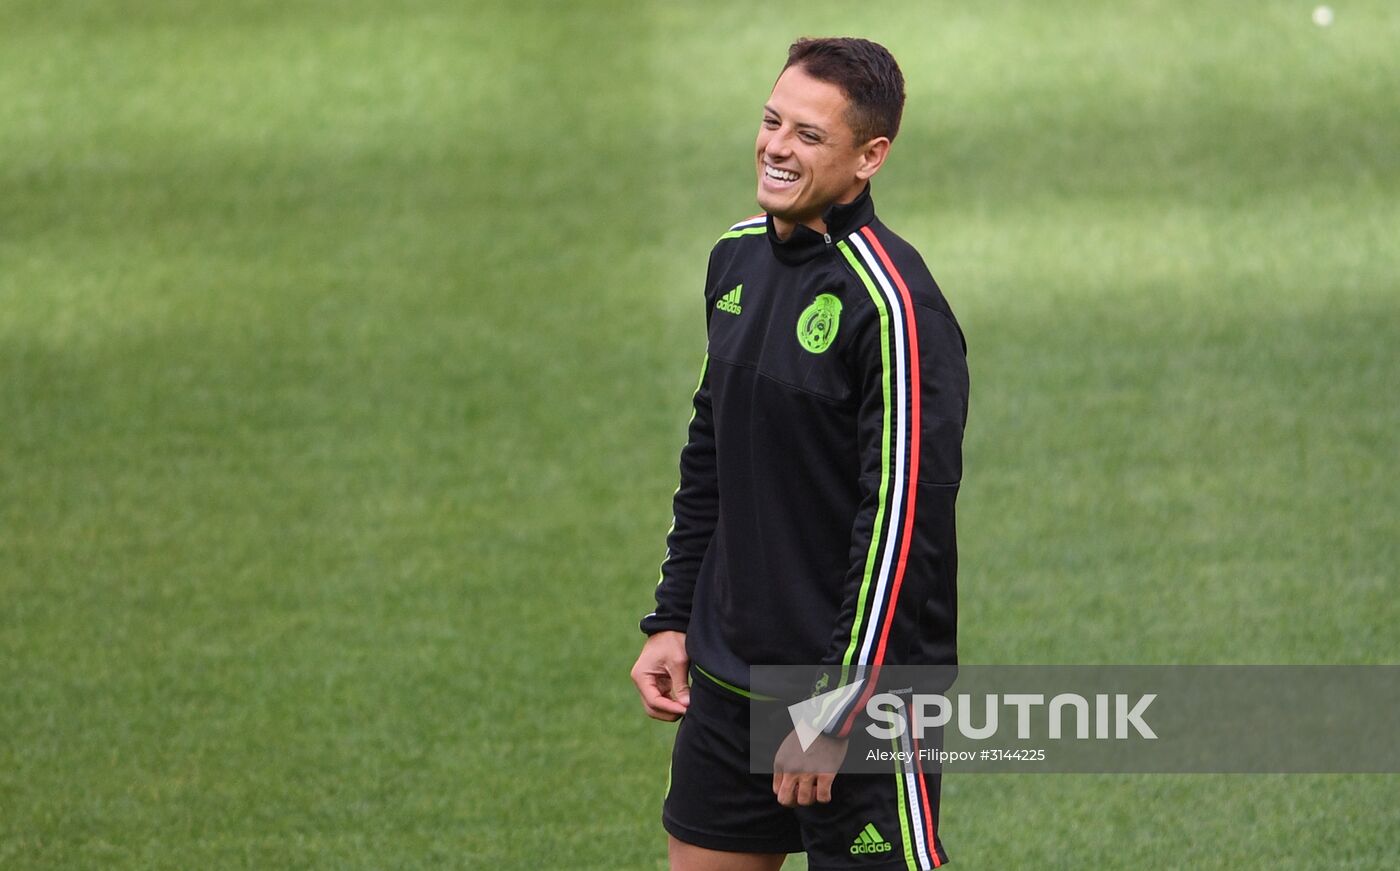 Football. 2017 FIFA Confederations Cup. Training session of Mexico’s national team